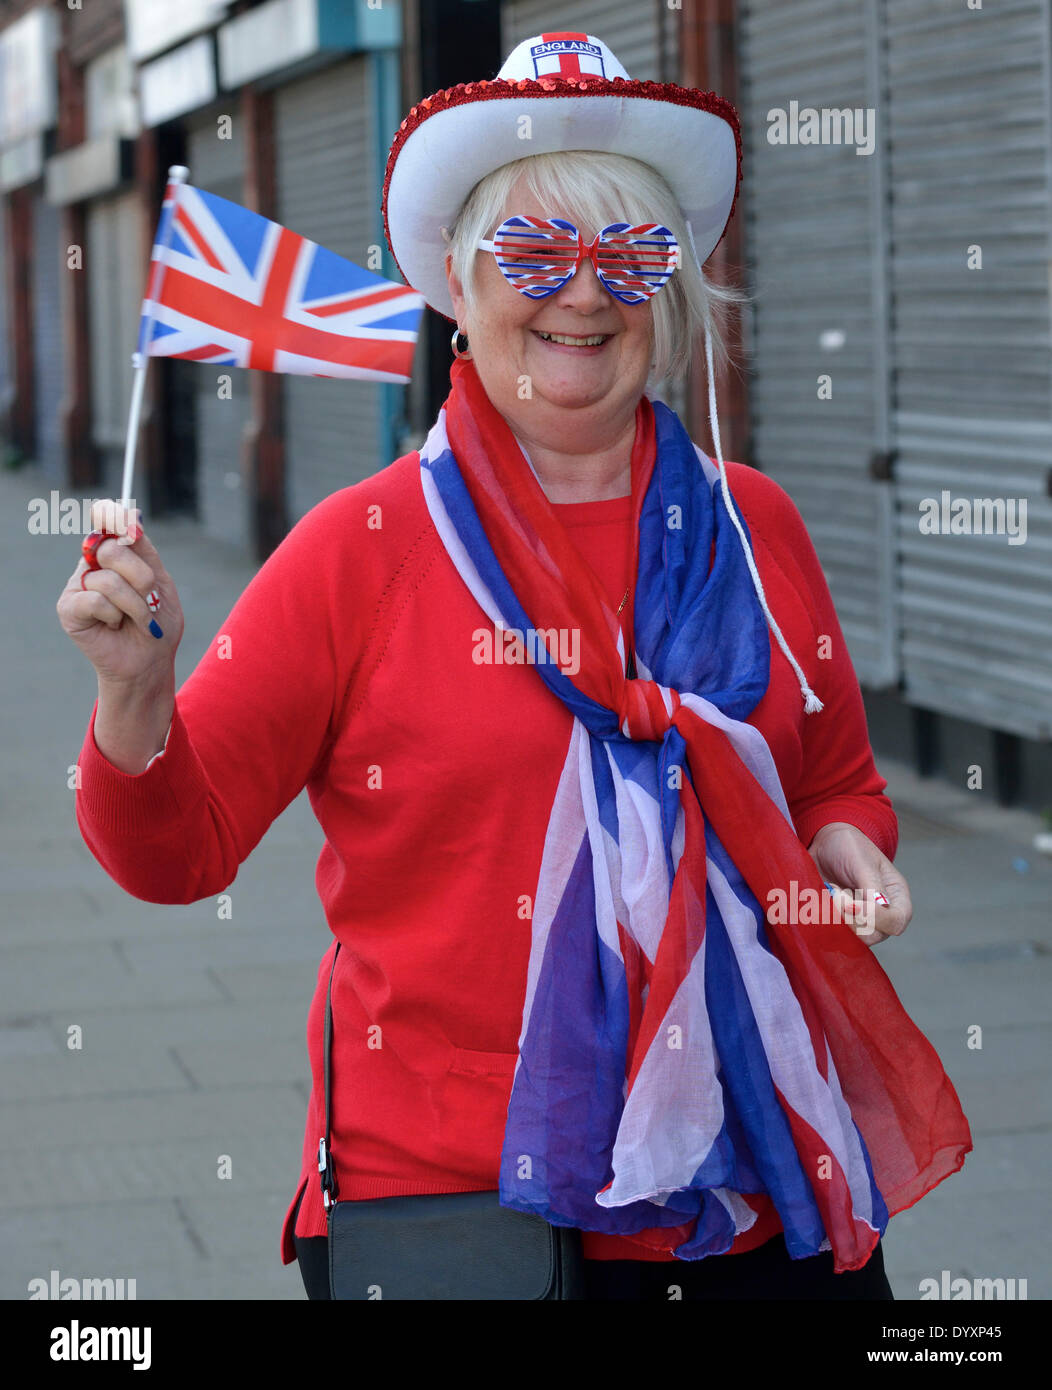 Manchester, UK. 27th Apr, 2014. Sixty-seven year old Linda Curran shows the England flag as she waits for the St George's Day Parade to pass along Oldham Road on its way through the centre of Manchester. St George's Day Parade  Manchester, UK  27th April 2014 Credit:  John Fryer/Alamy Live News Stock Photo